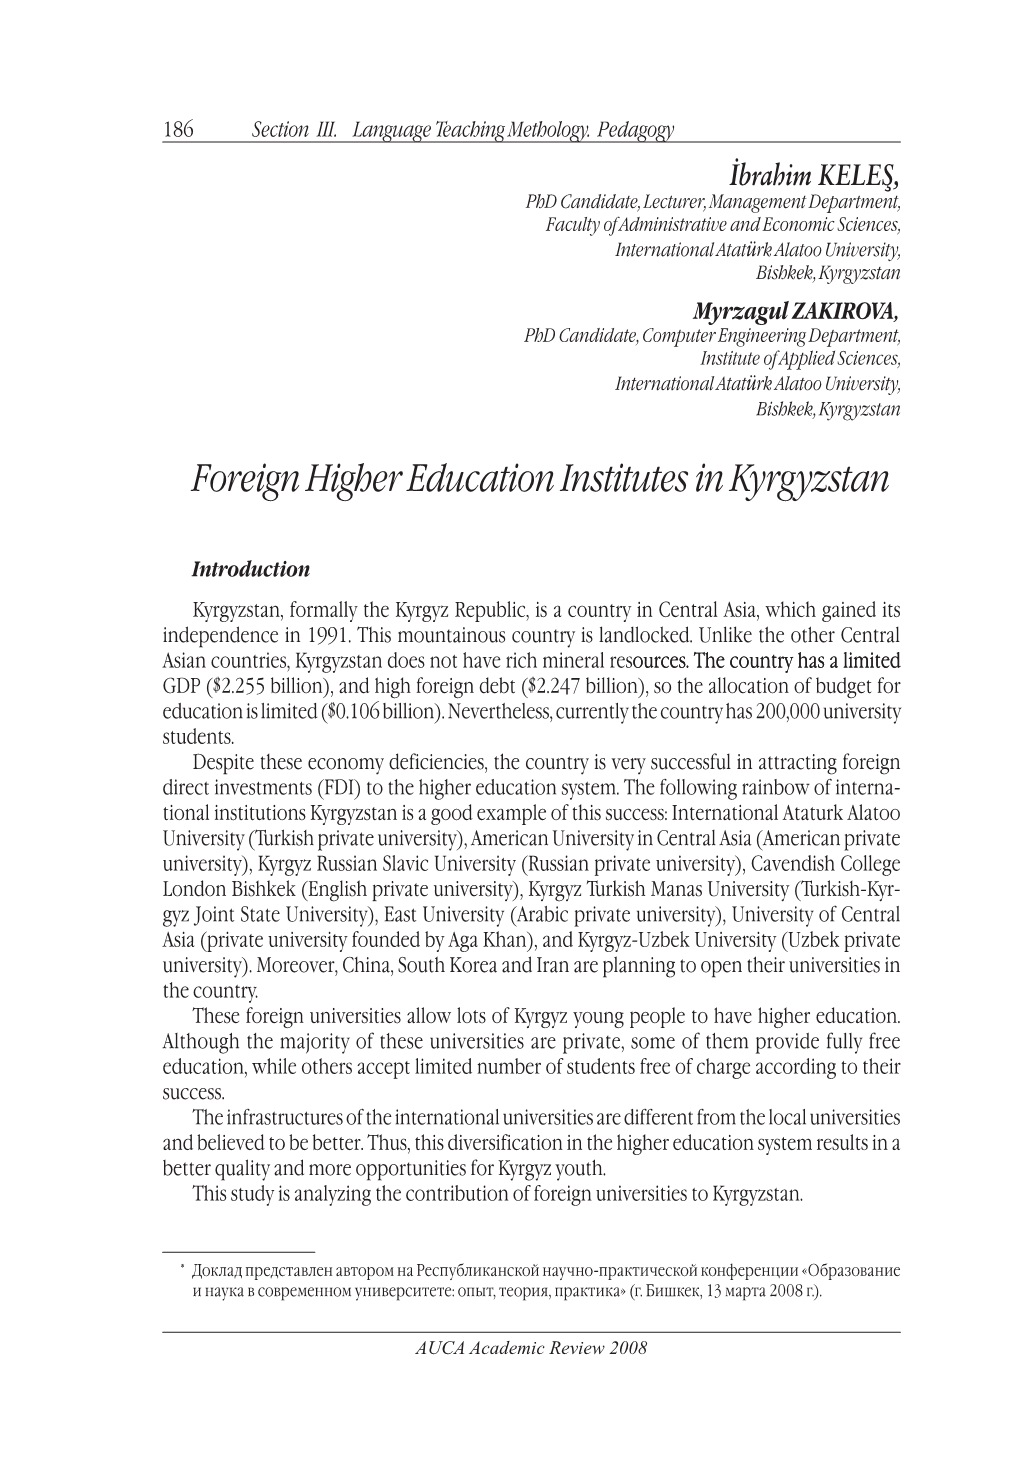 Foreign Higher Education Institutes in Kyrgyzstan